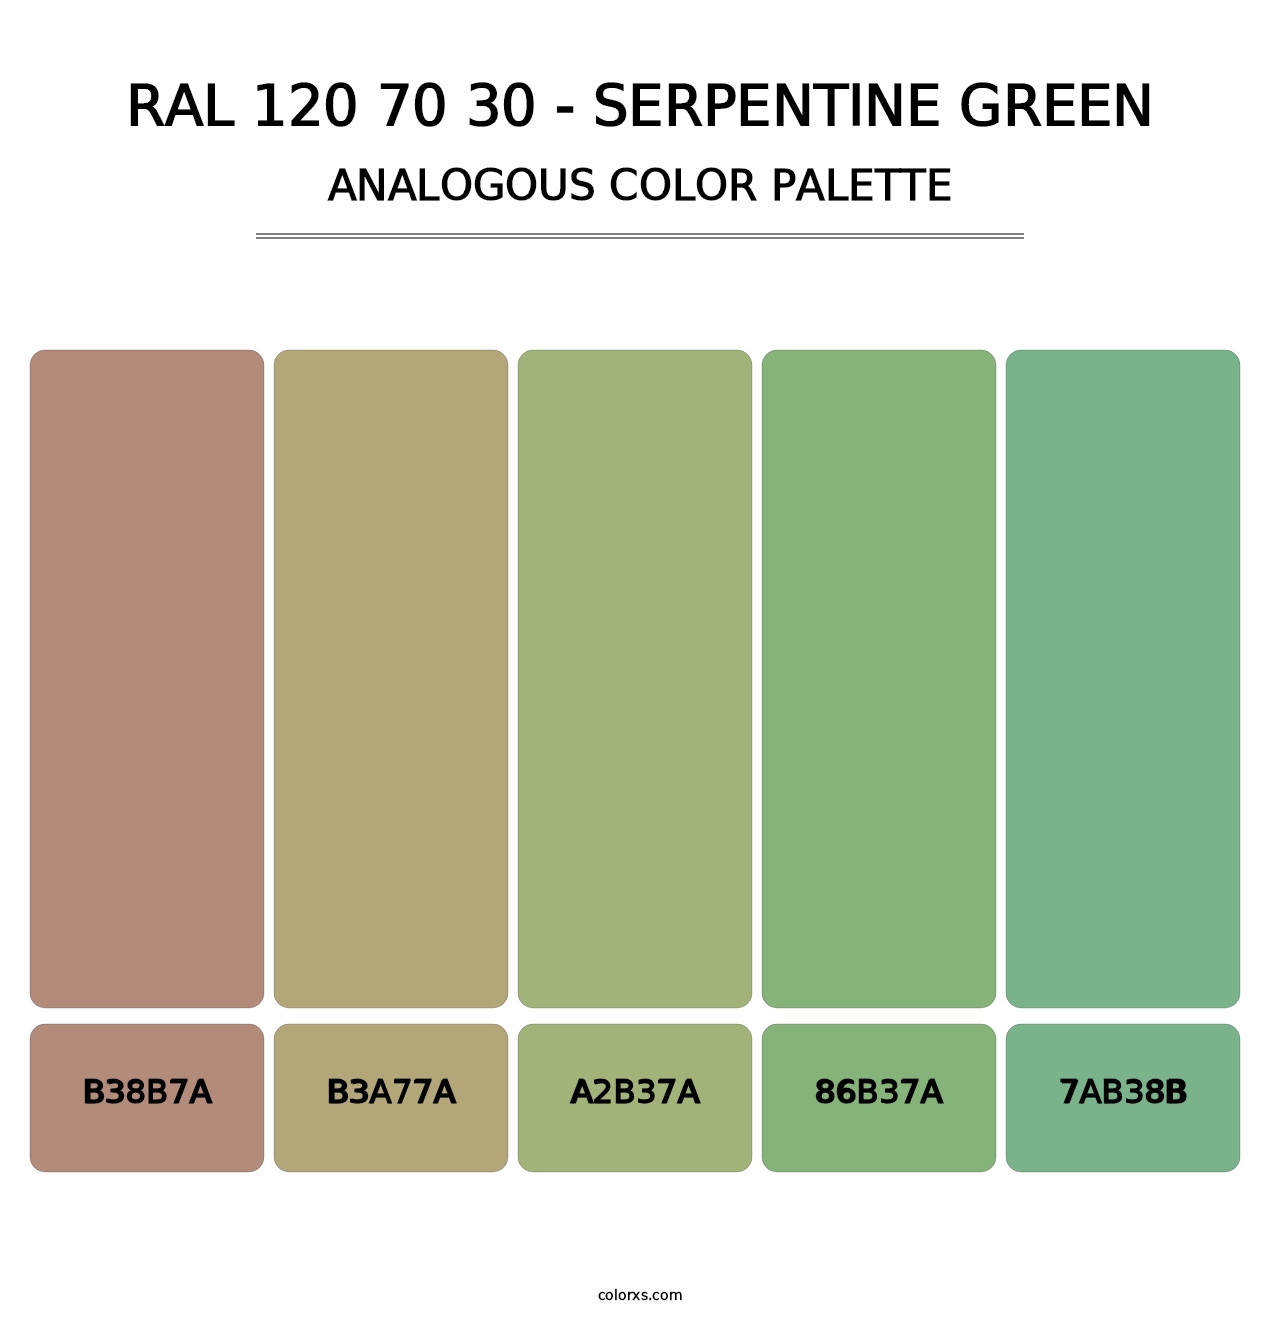 RAL 120 70 30 - Serpentine Green - Analogous Color Palette